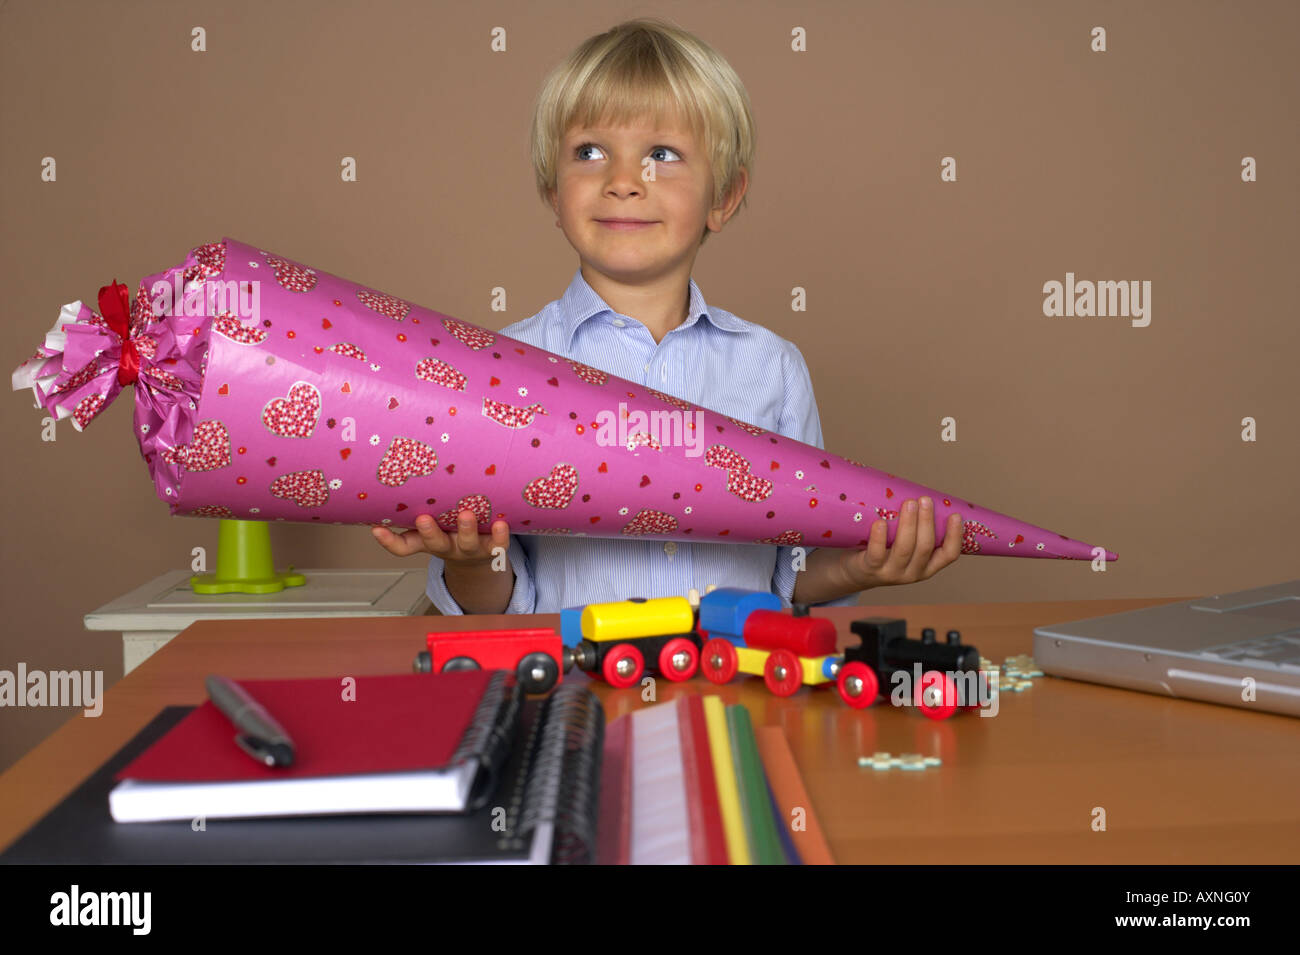 Boy (4-5 Years) holding a decorative cone Stock Photo